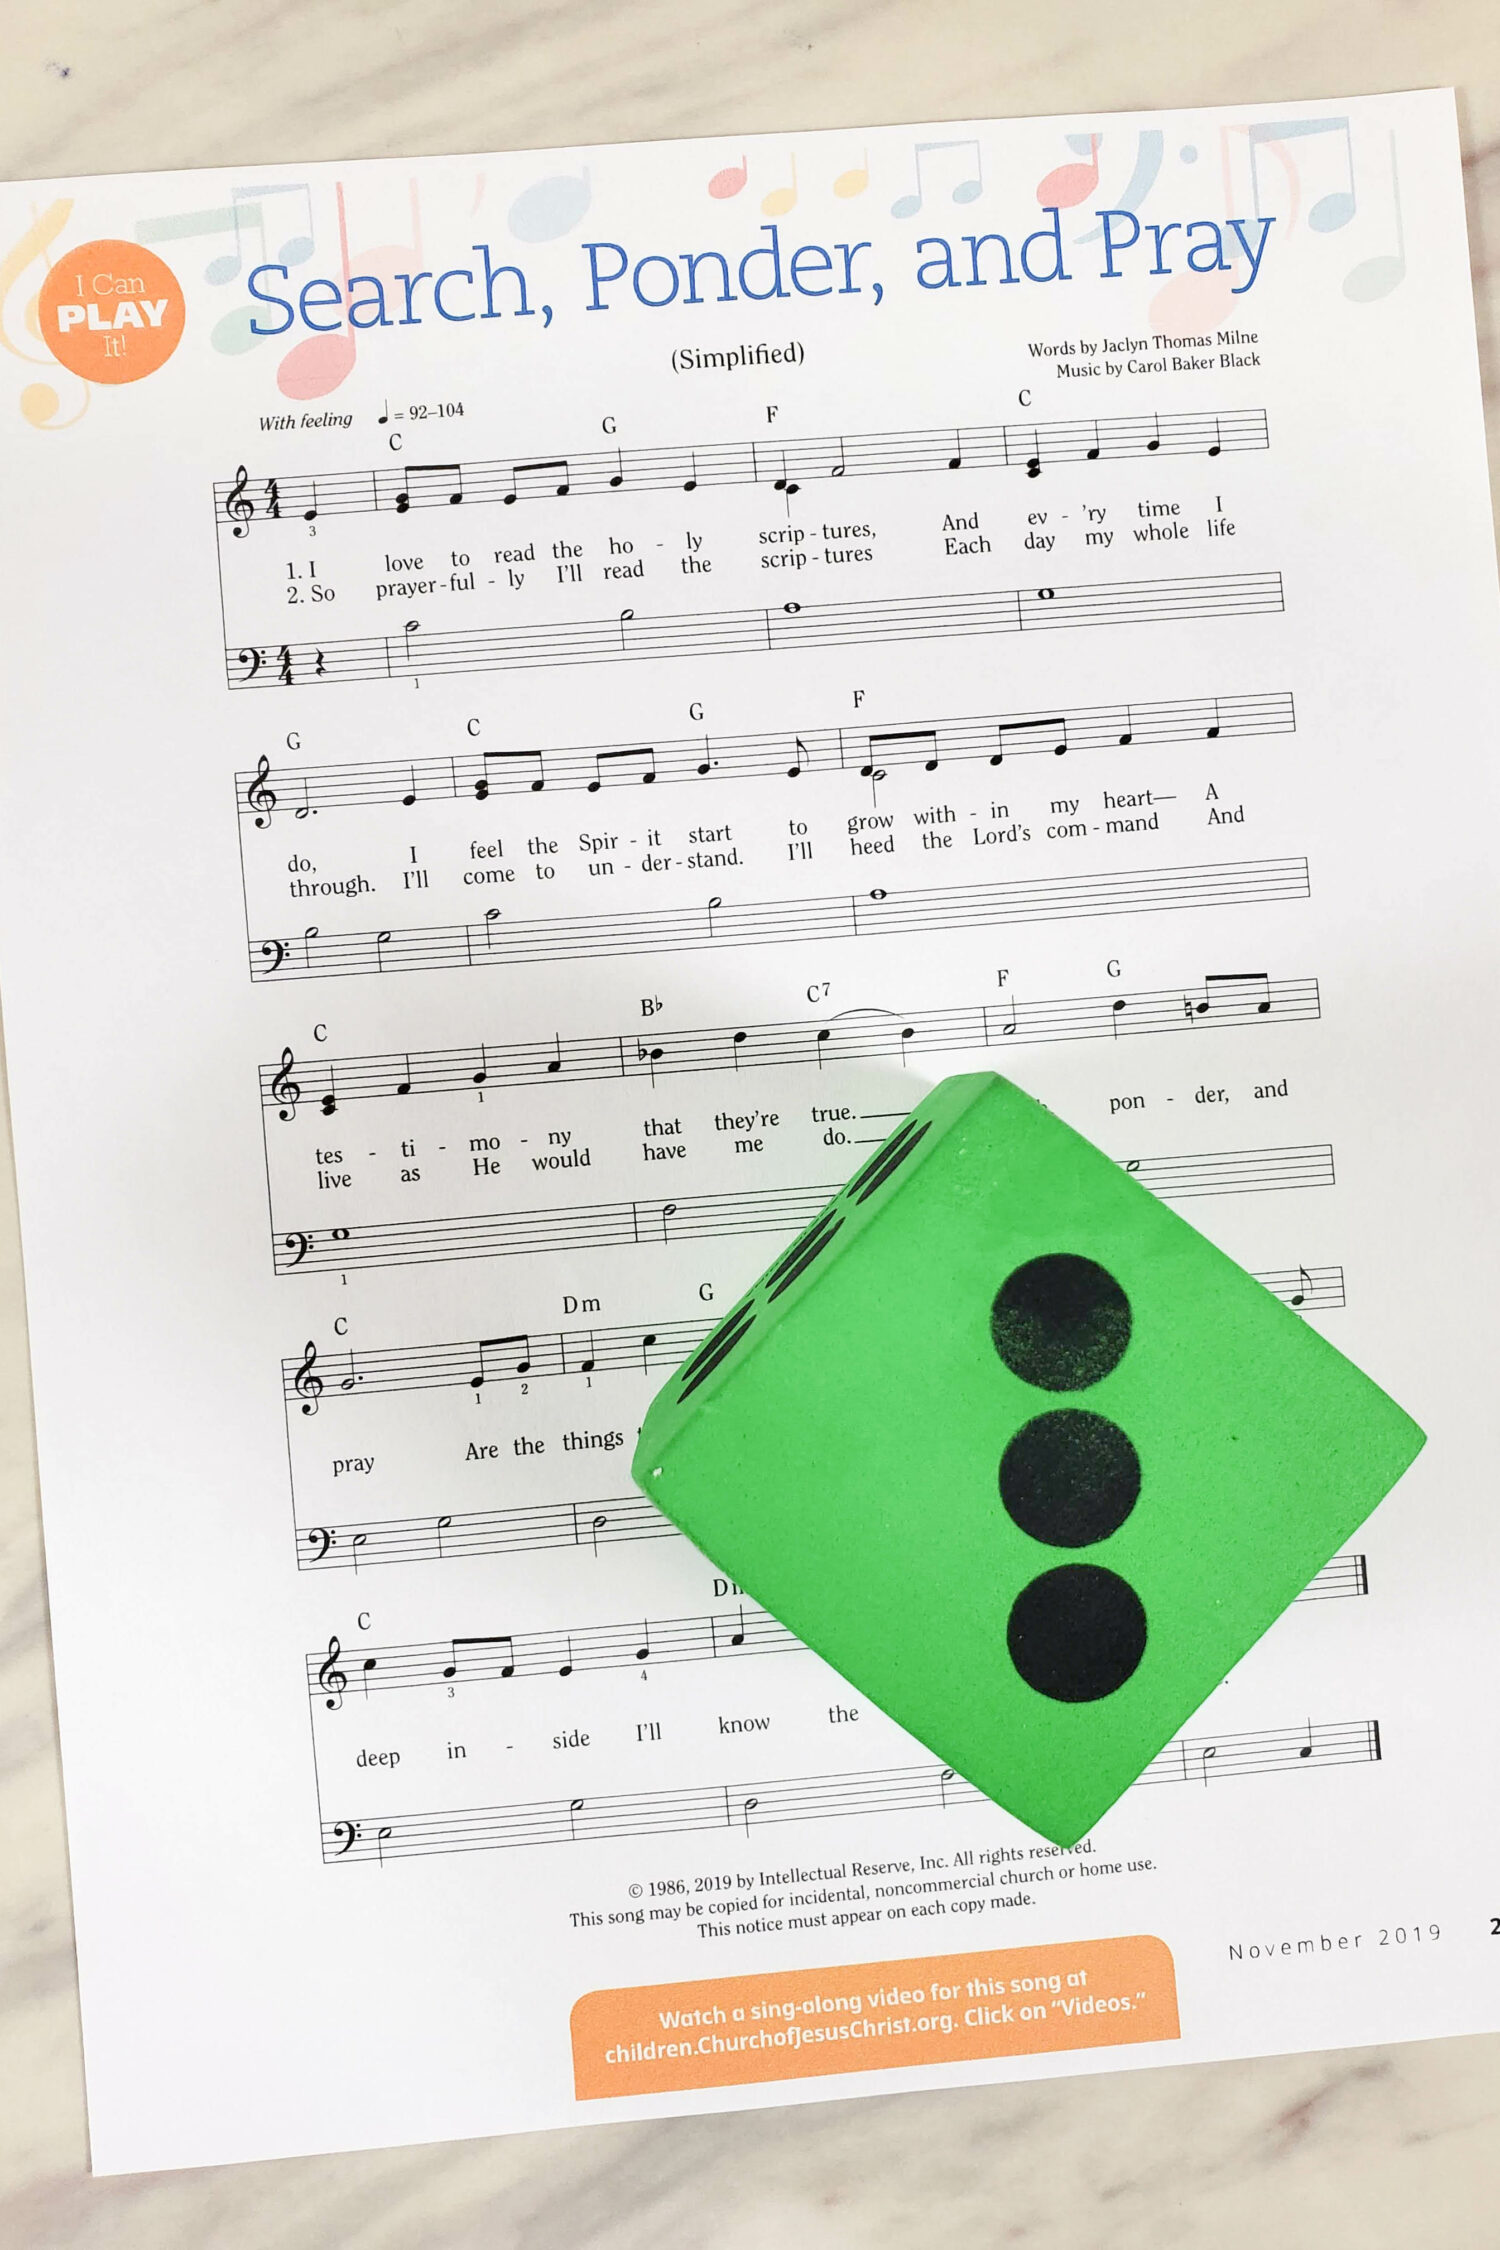 6 fun and easy ways to use "I Can Play It" simplified Primary songs sheet music! Incorporate more activities with the senior primary children learning to play the beautiful Primary music at home or at church. Ideas for LDS Primary music Leaders for singing time or fun at home challenges for the kids.